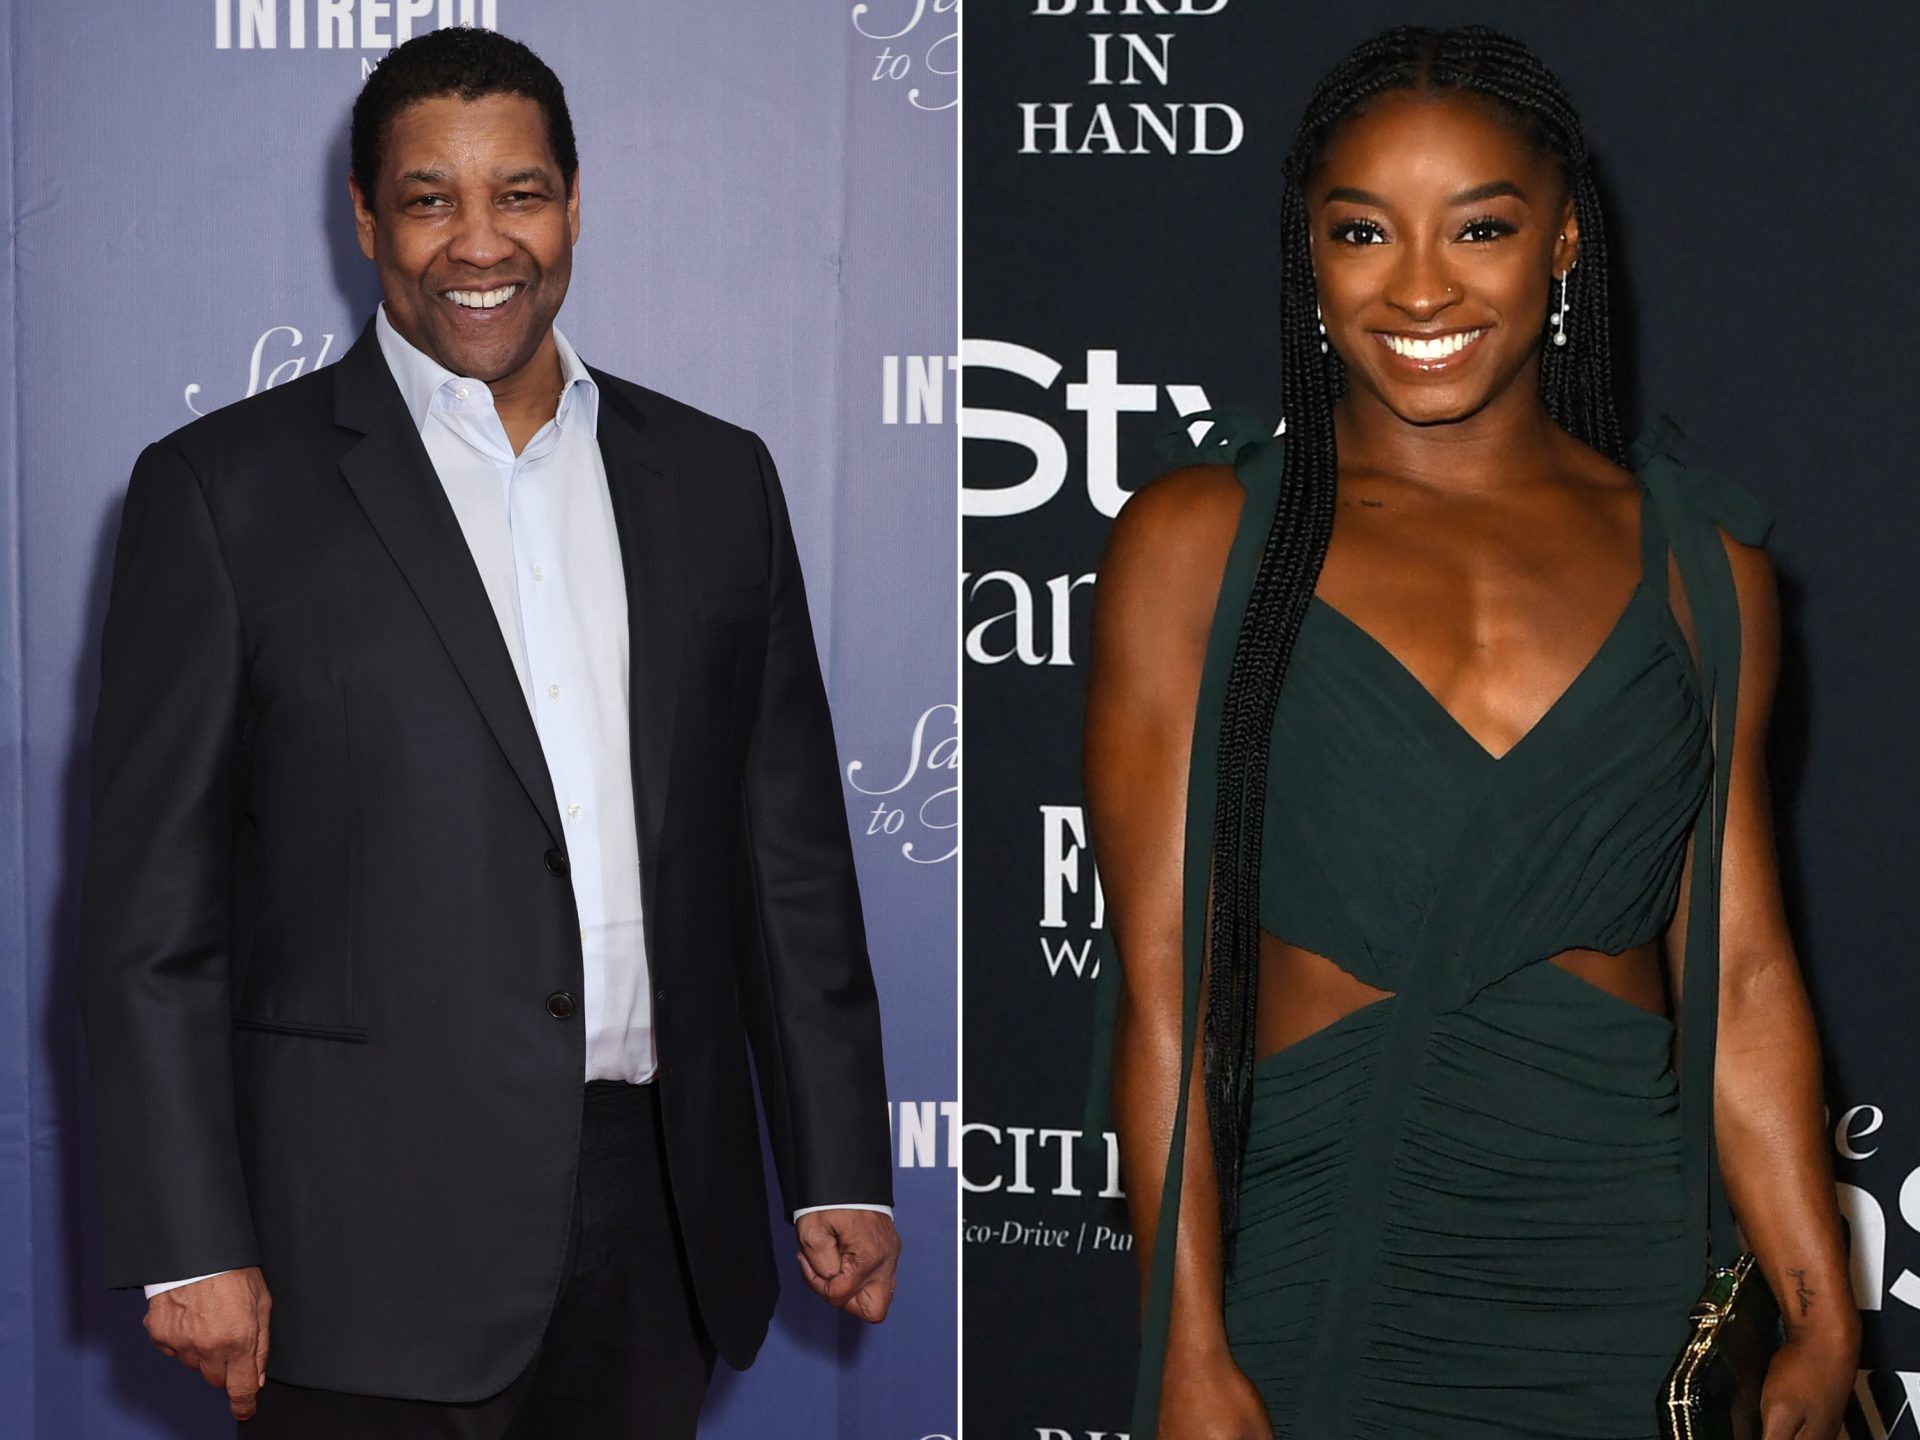 Denzel Washington & Simone Biles Among The Honorees To Be Presented With The Presidential Medal Of Freedom 